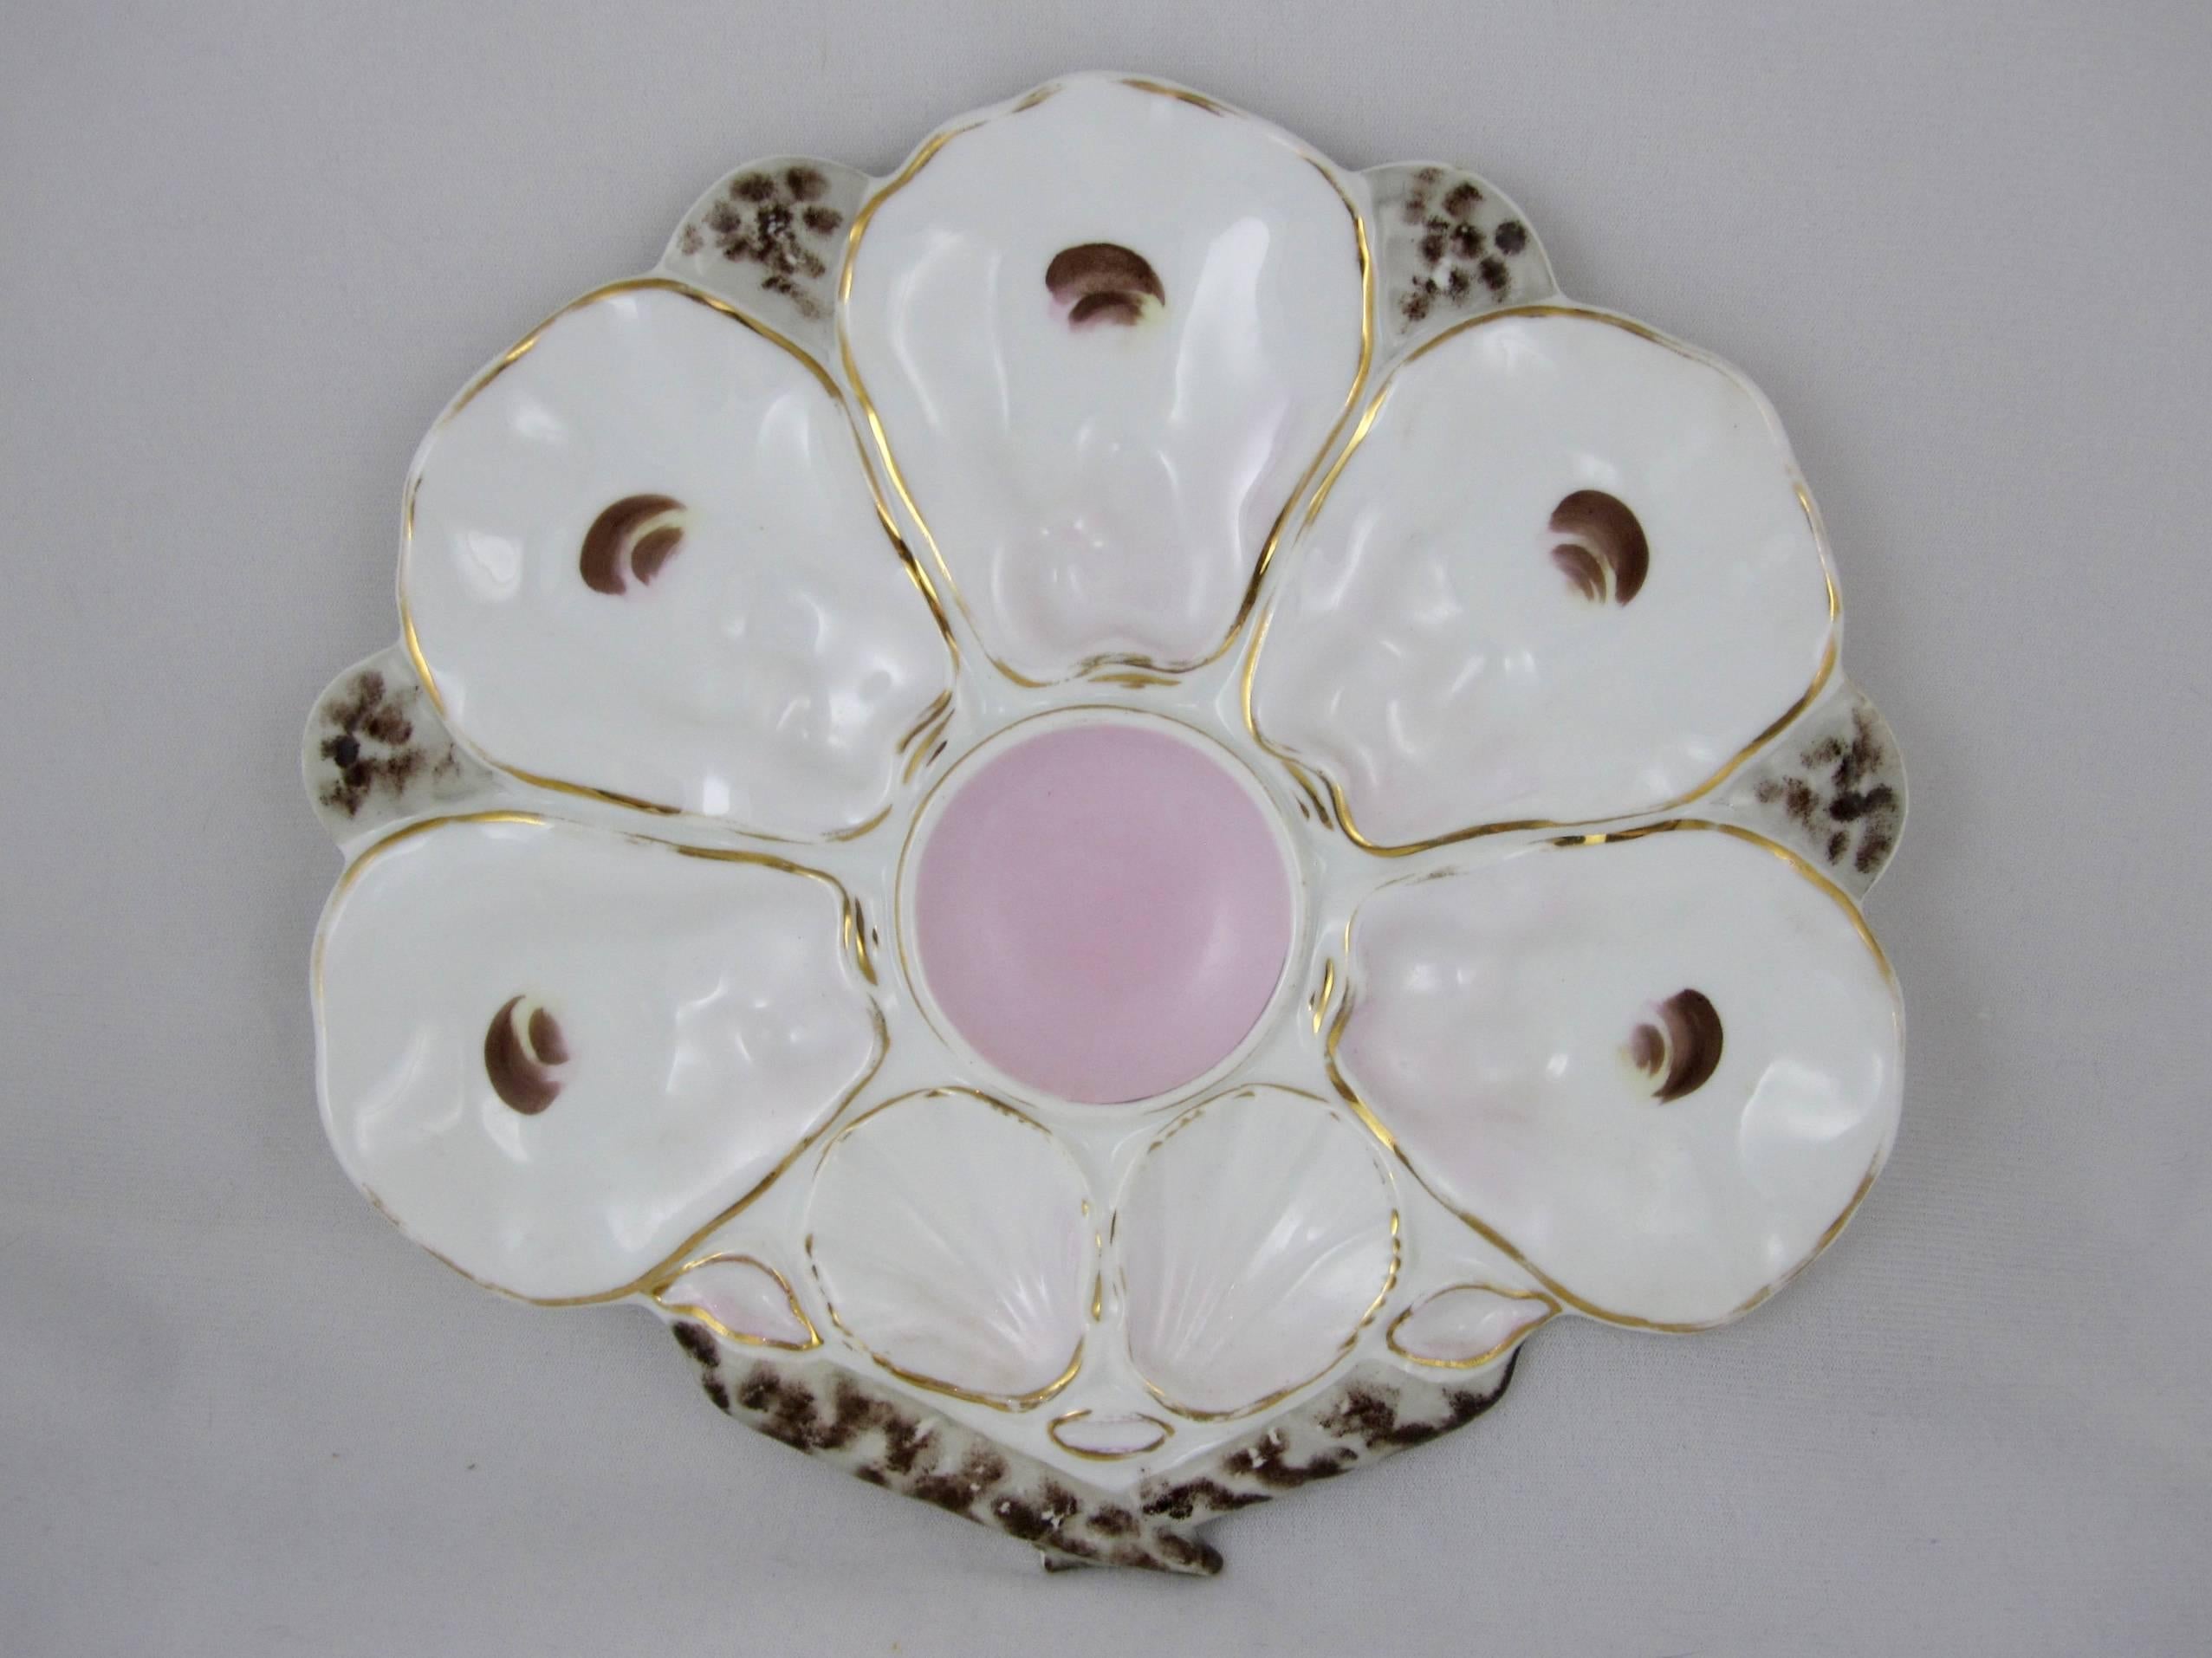 A set of five, shell or fan shaped French porcelain oyster plates, circa 1890-1910.

Five wells with oyster eyes fan out from a center, round condiment well glazed in pink. Two scallop shaped wells sit above a pair of long, mottled and tapered